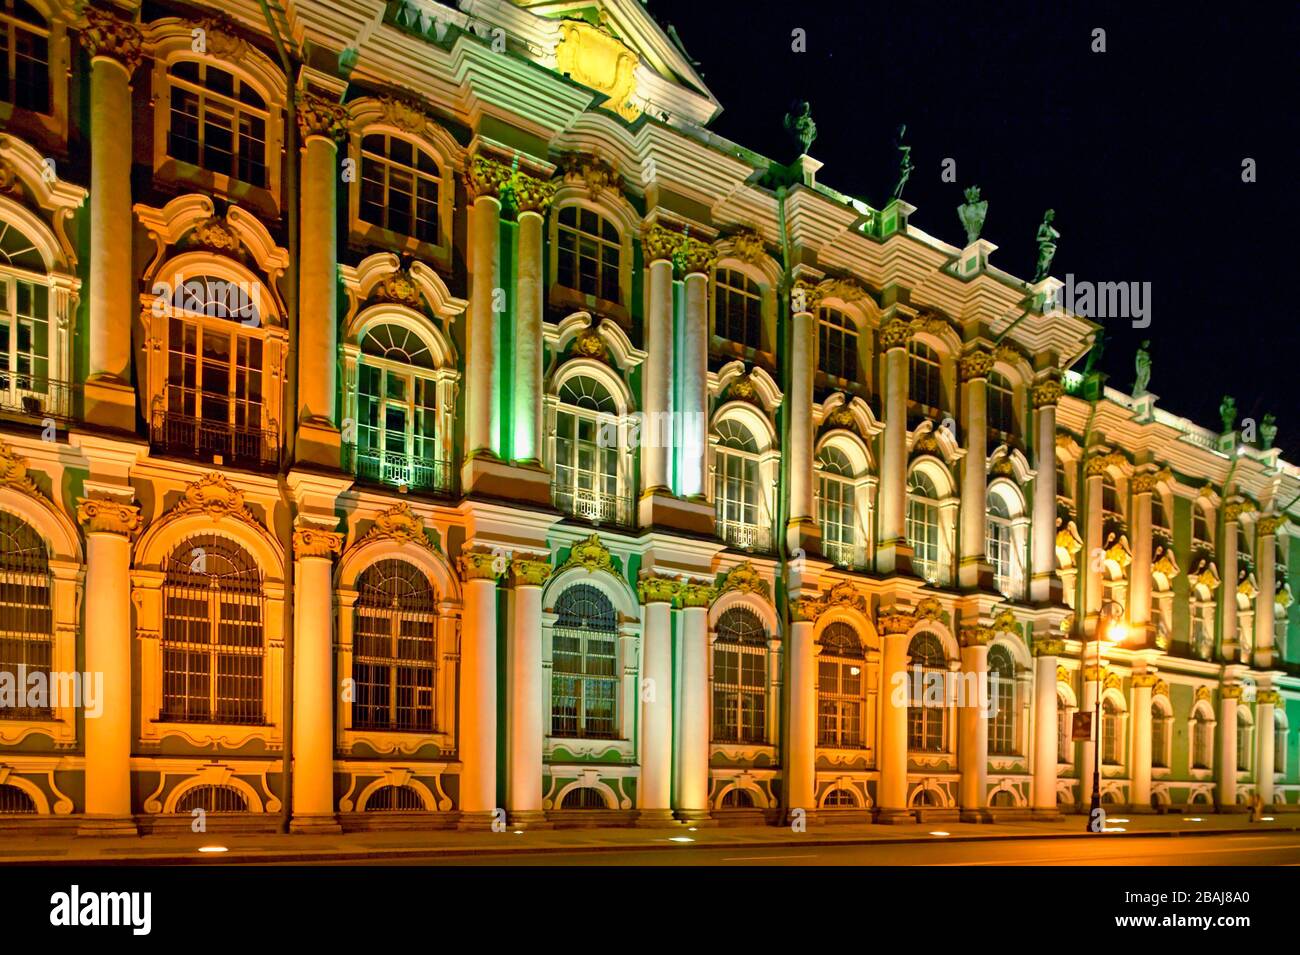 Winter Palace, Hermitage Museum at night in St. Petersburg, Russian Federation Stock Photo